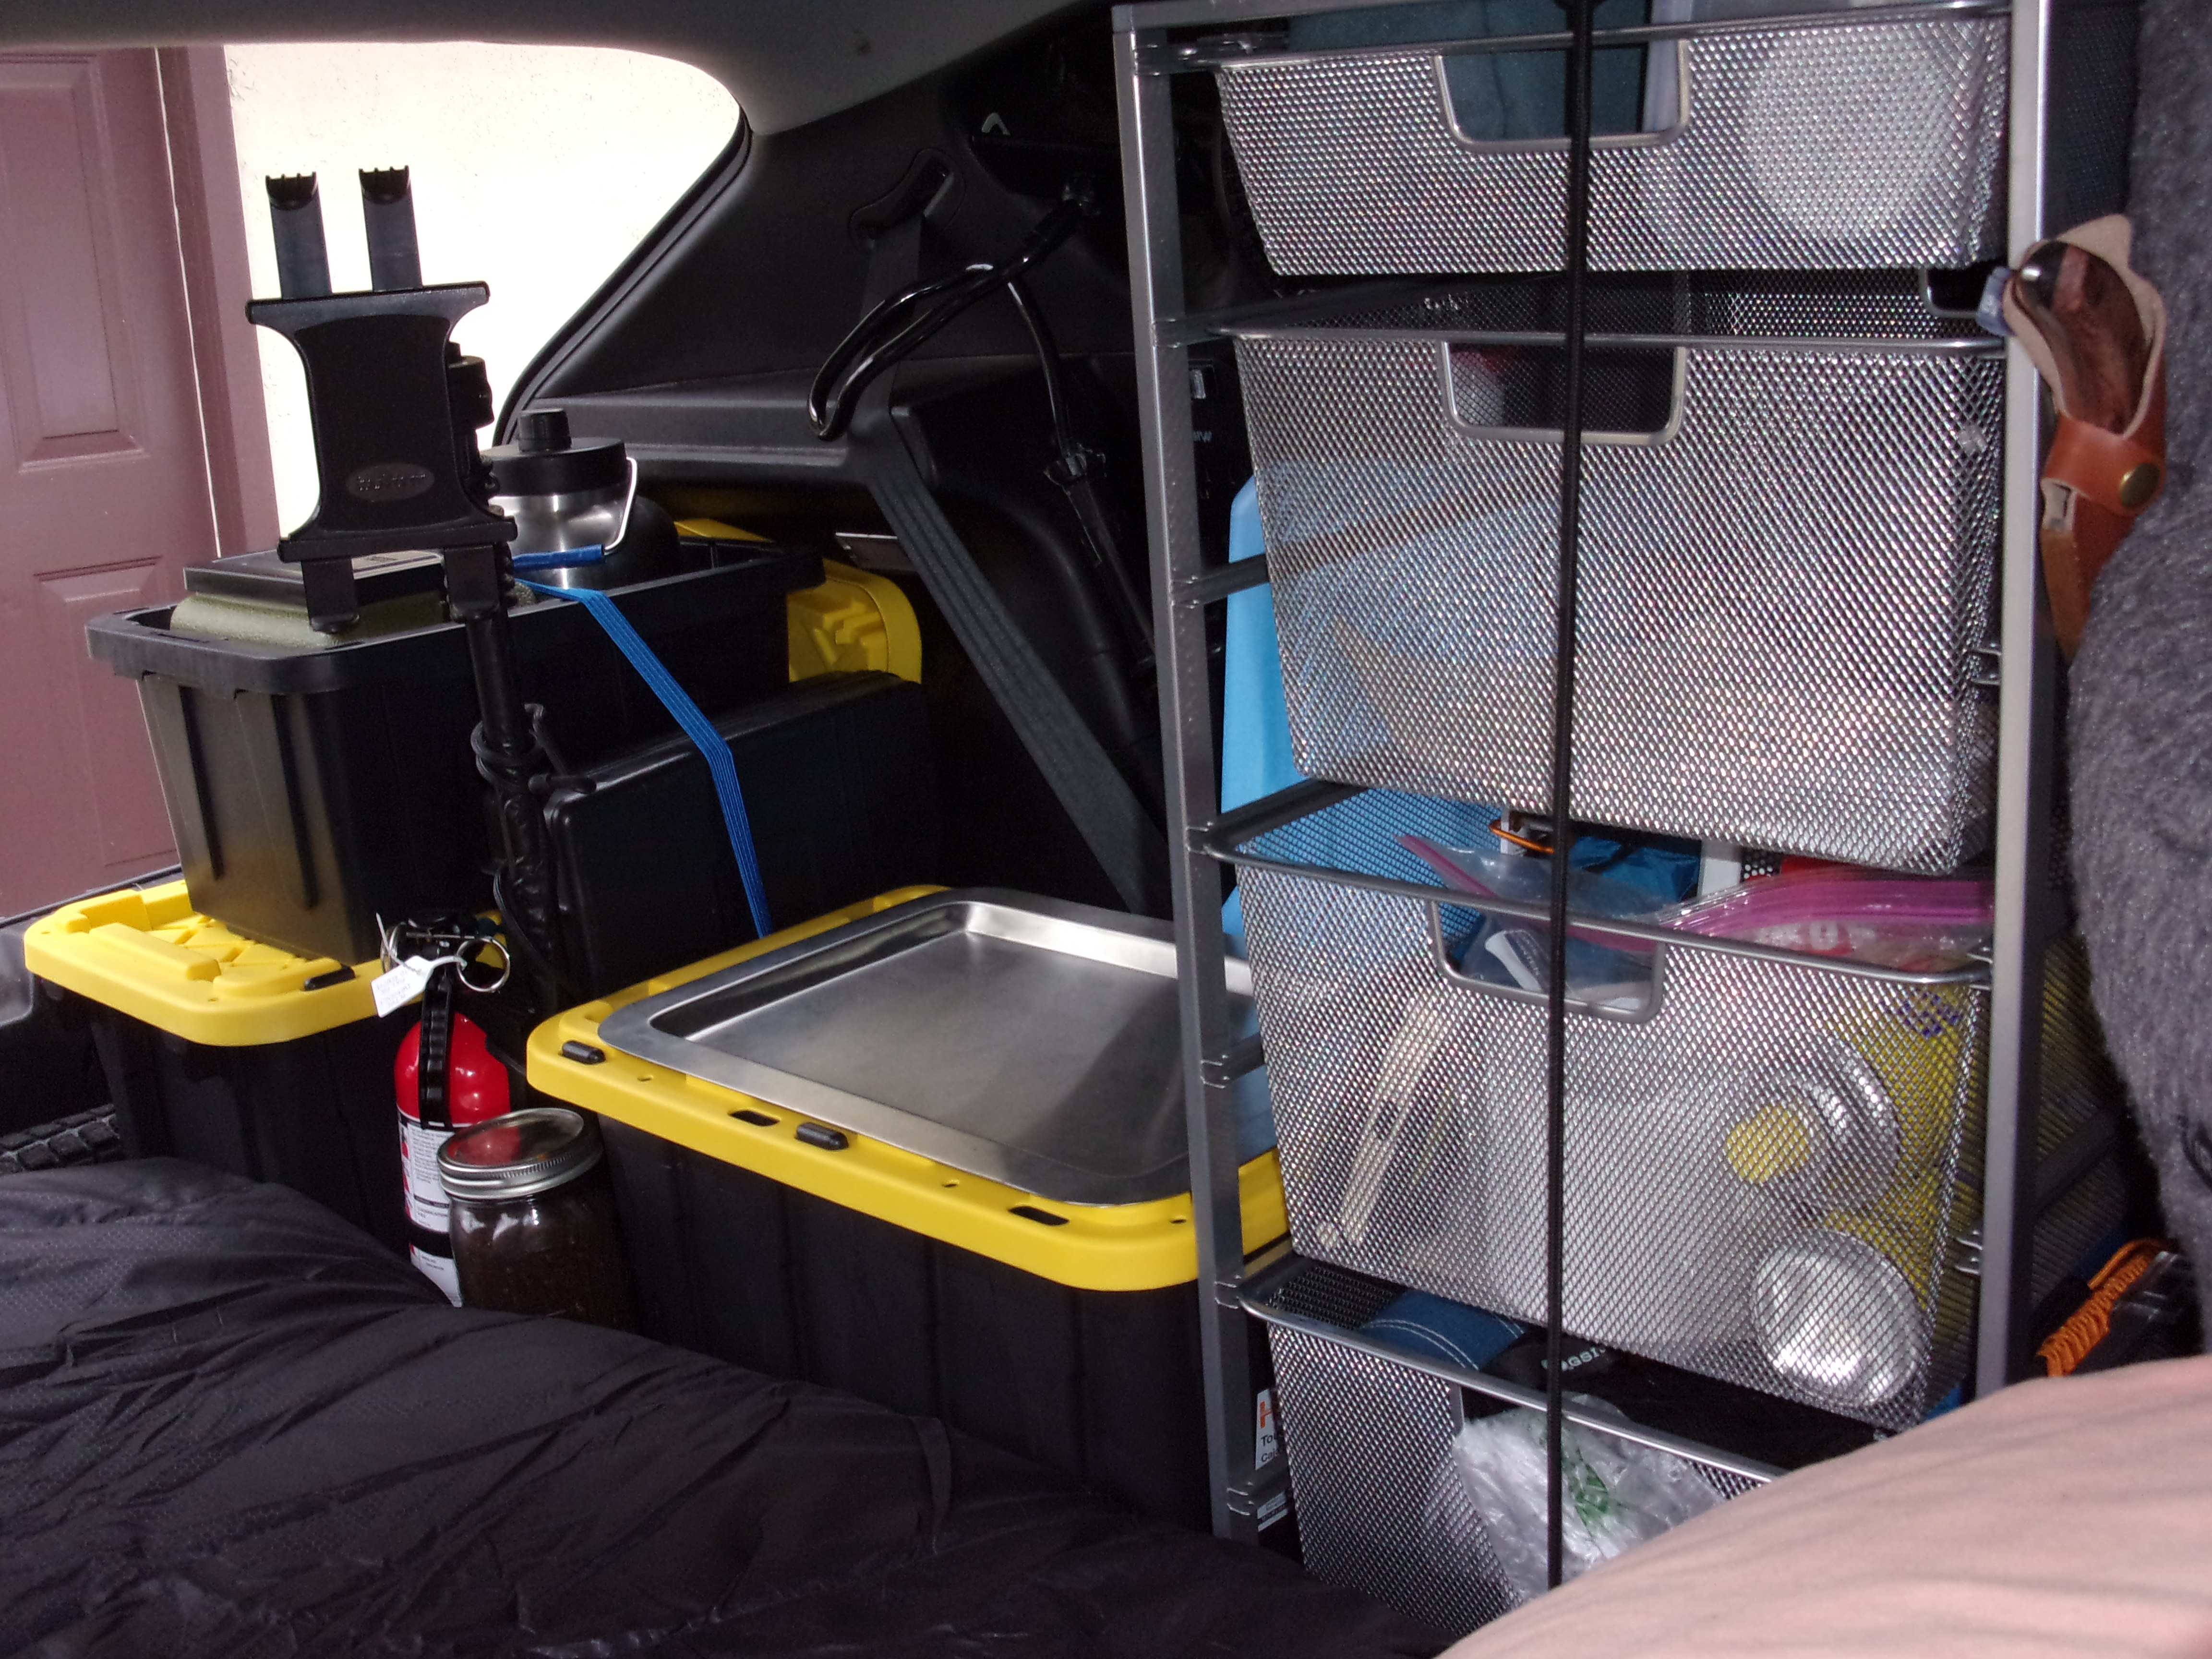 Storage totes or build ins? - Tent + Car Camping Campfire - The Dyrt Forums